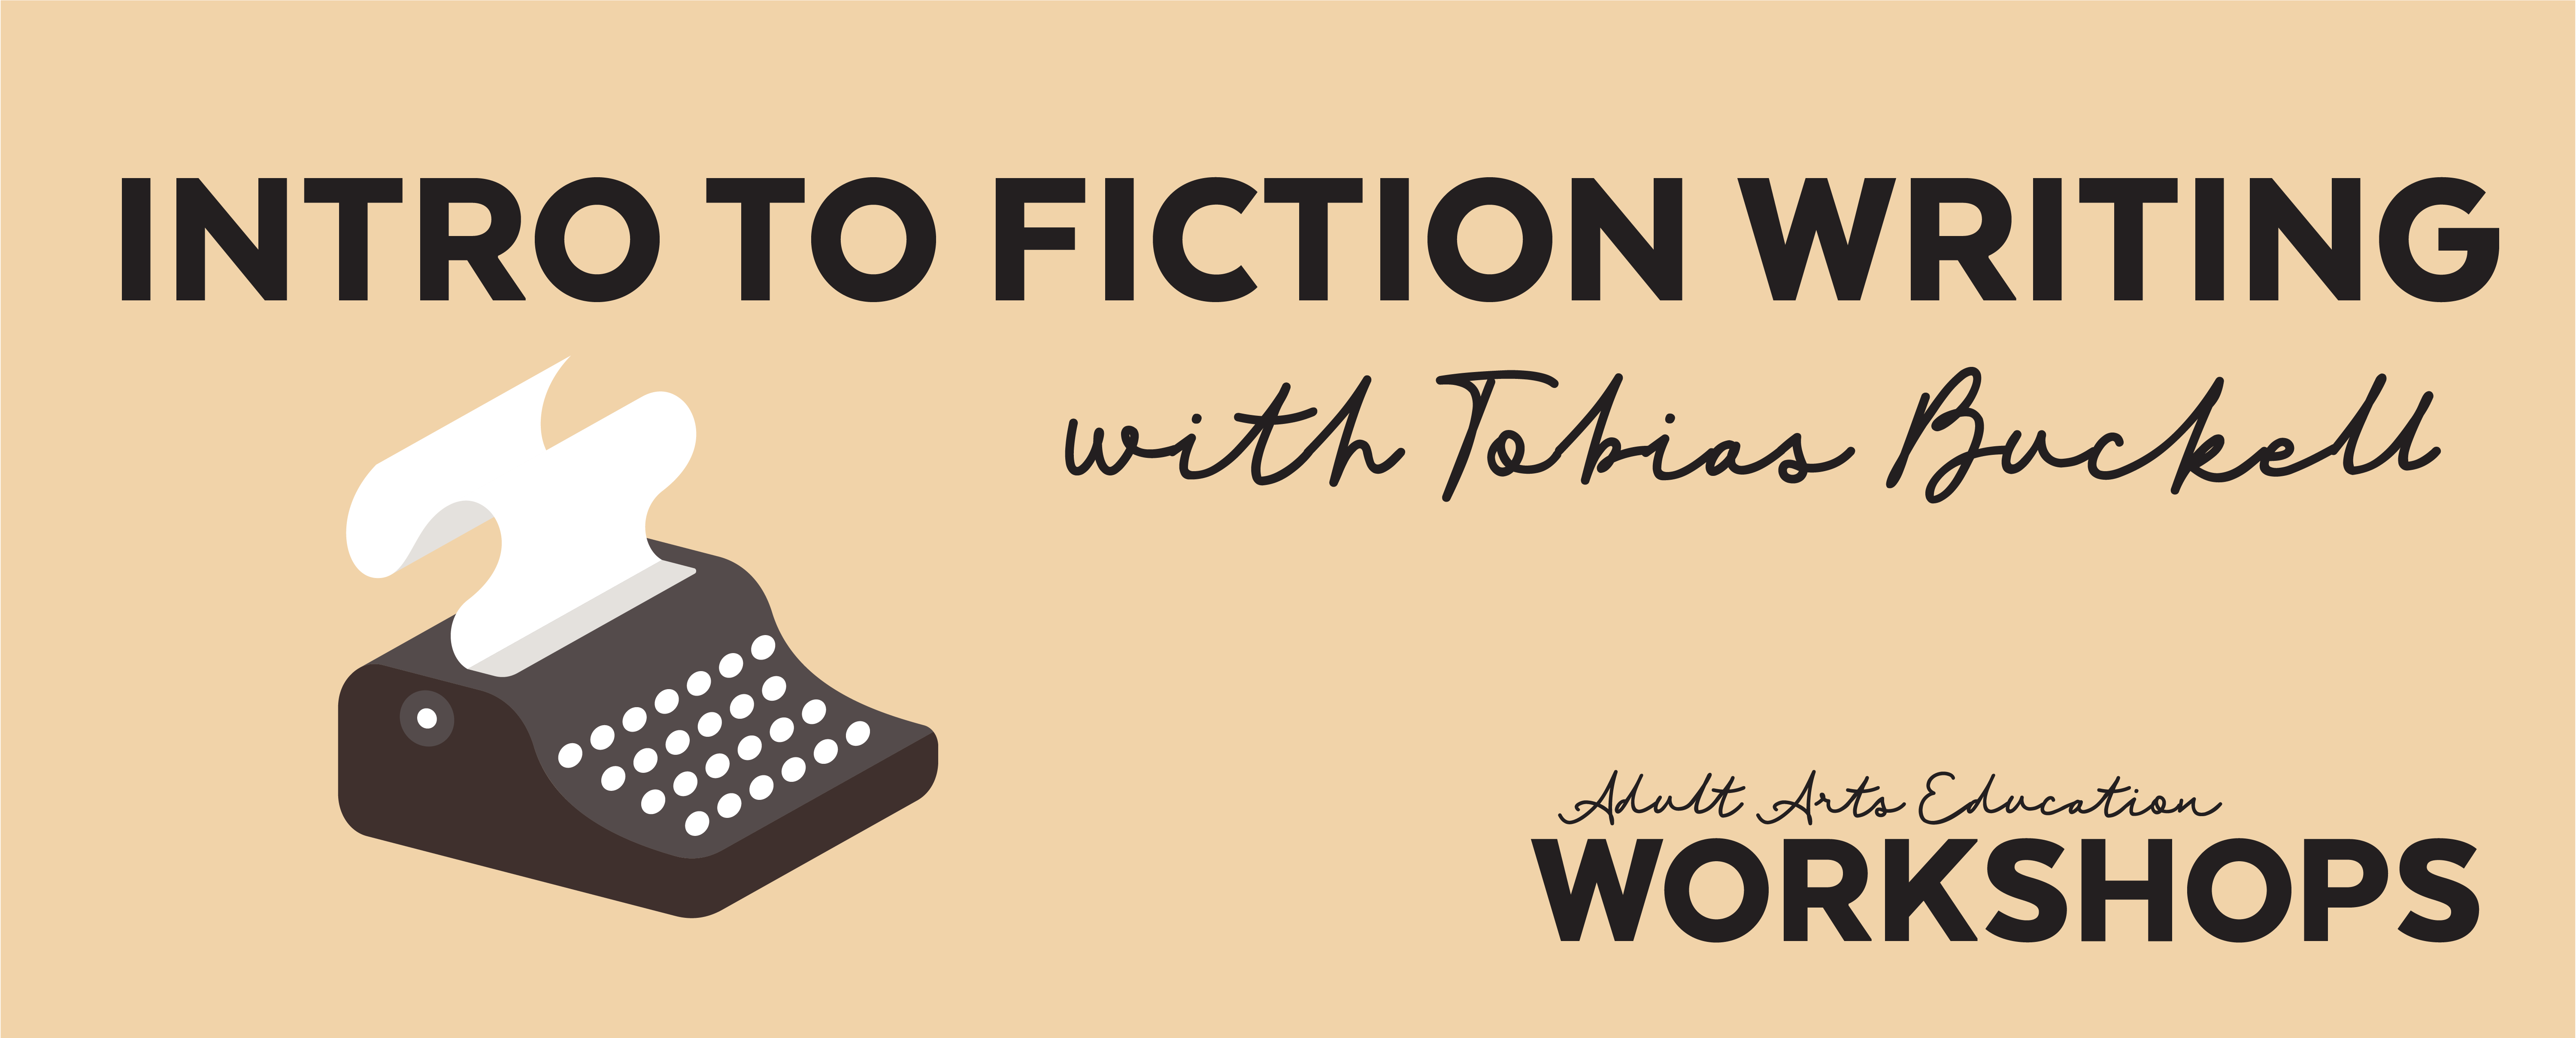 Intro to Fiction Writing with Tobias Buckell